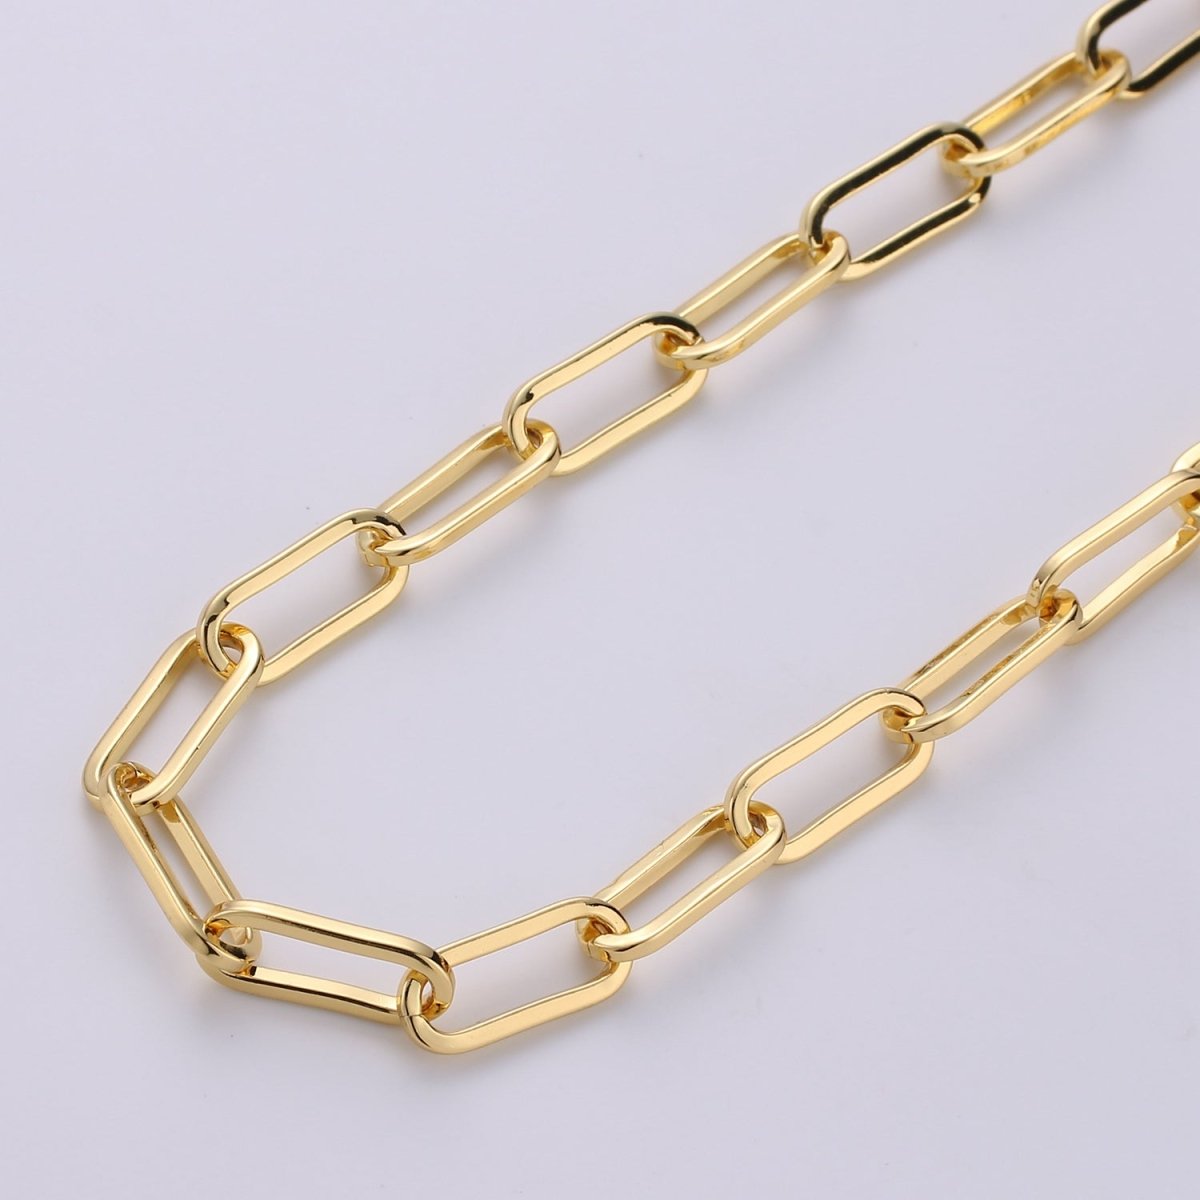 Chunky Paperclip Chain Necklace 16x7mm 24K Gold Filled Jumbo Link Paper Clip Chain 1 yard Lead, Nickel Free Unfinished Link Chain | ROLL-232 - DLUXCA